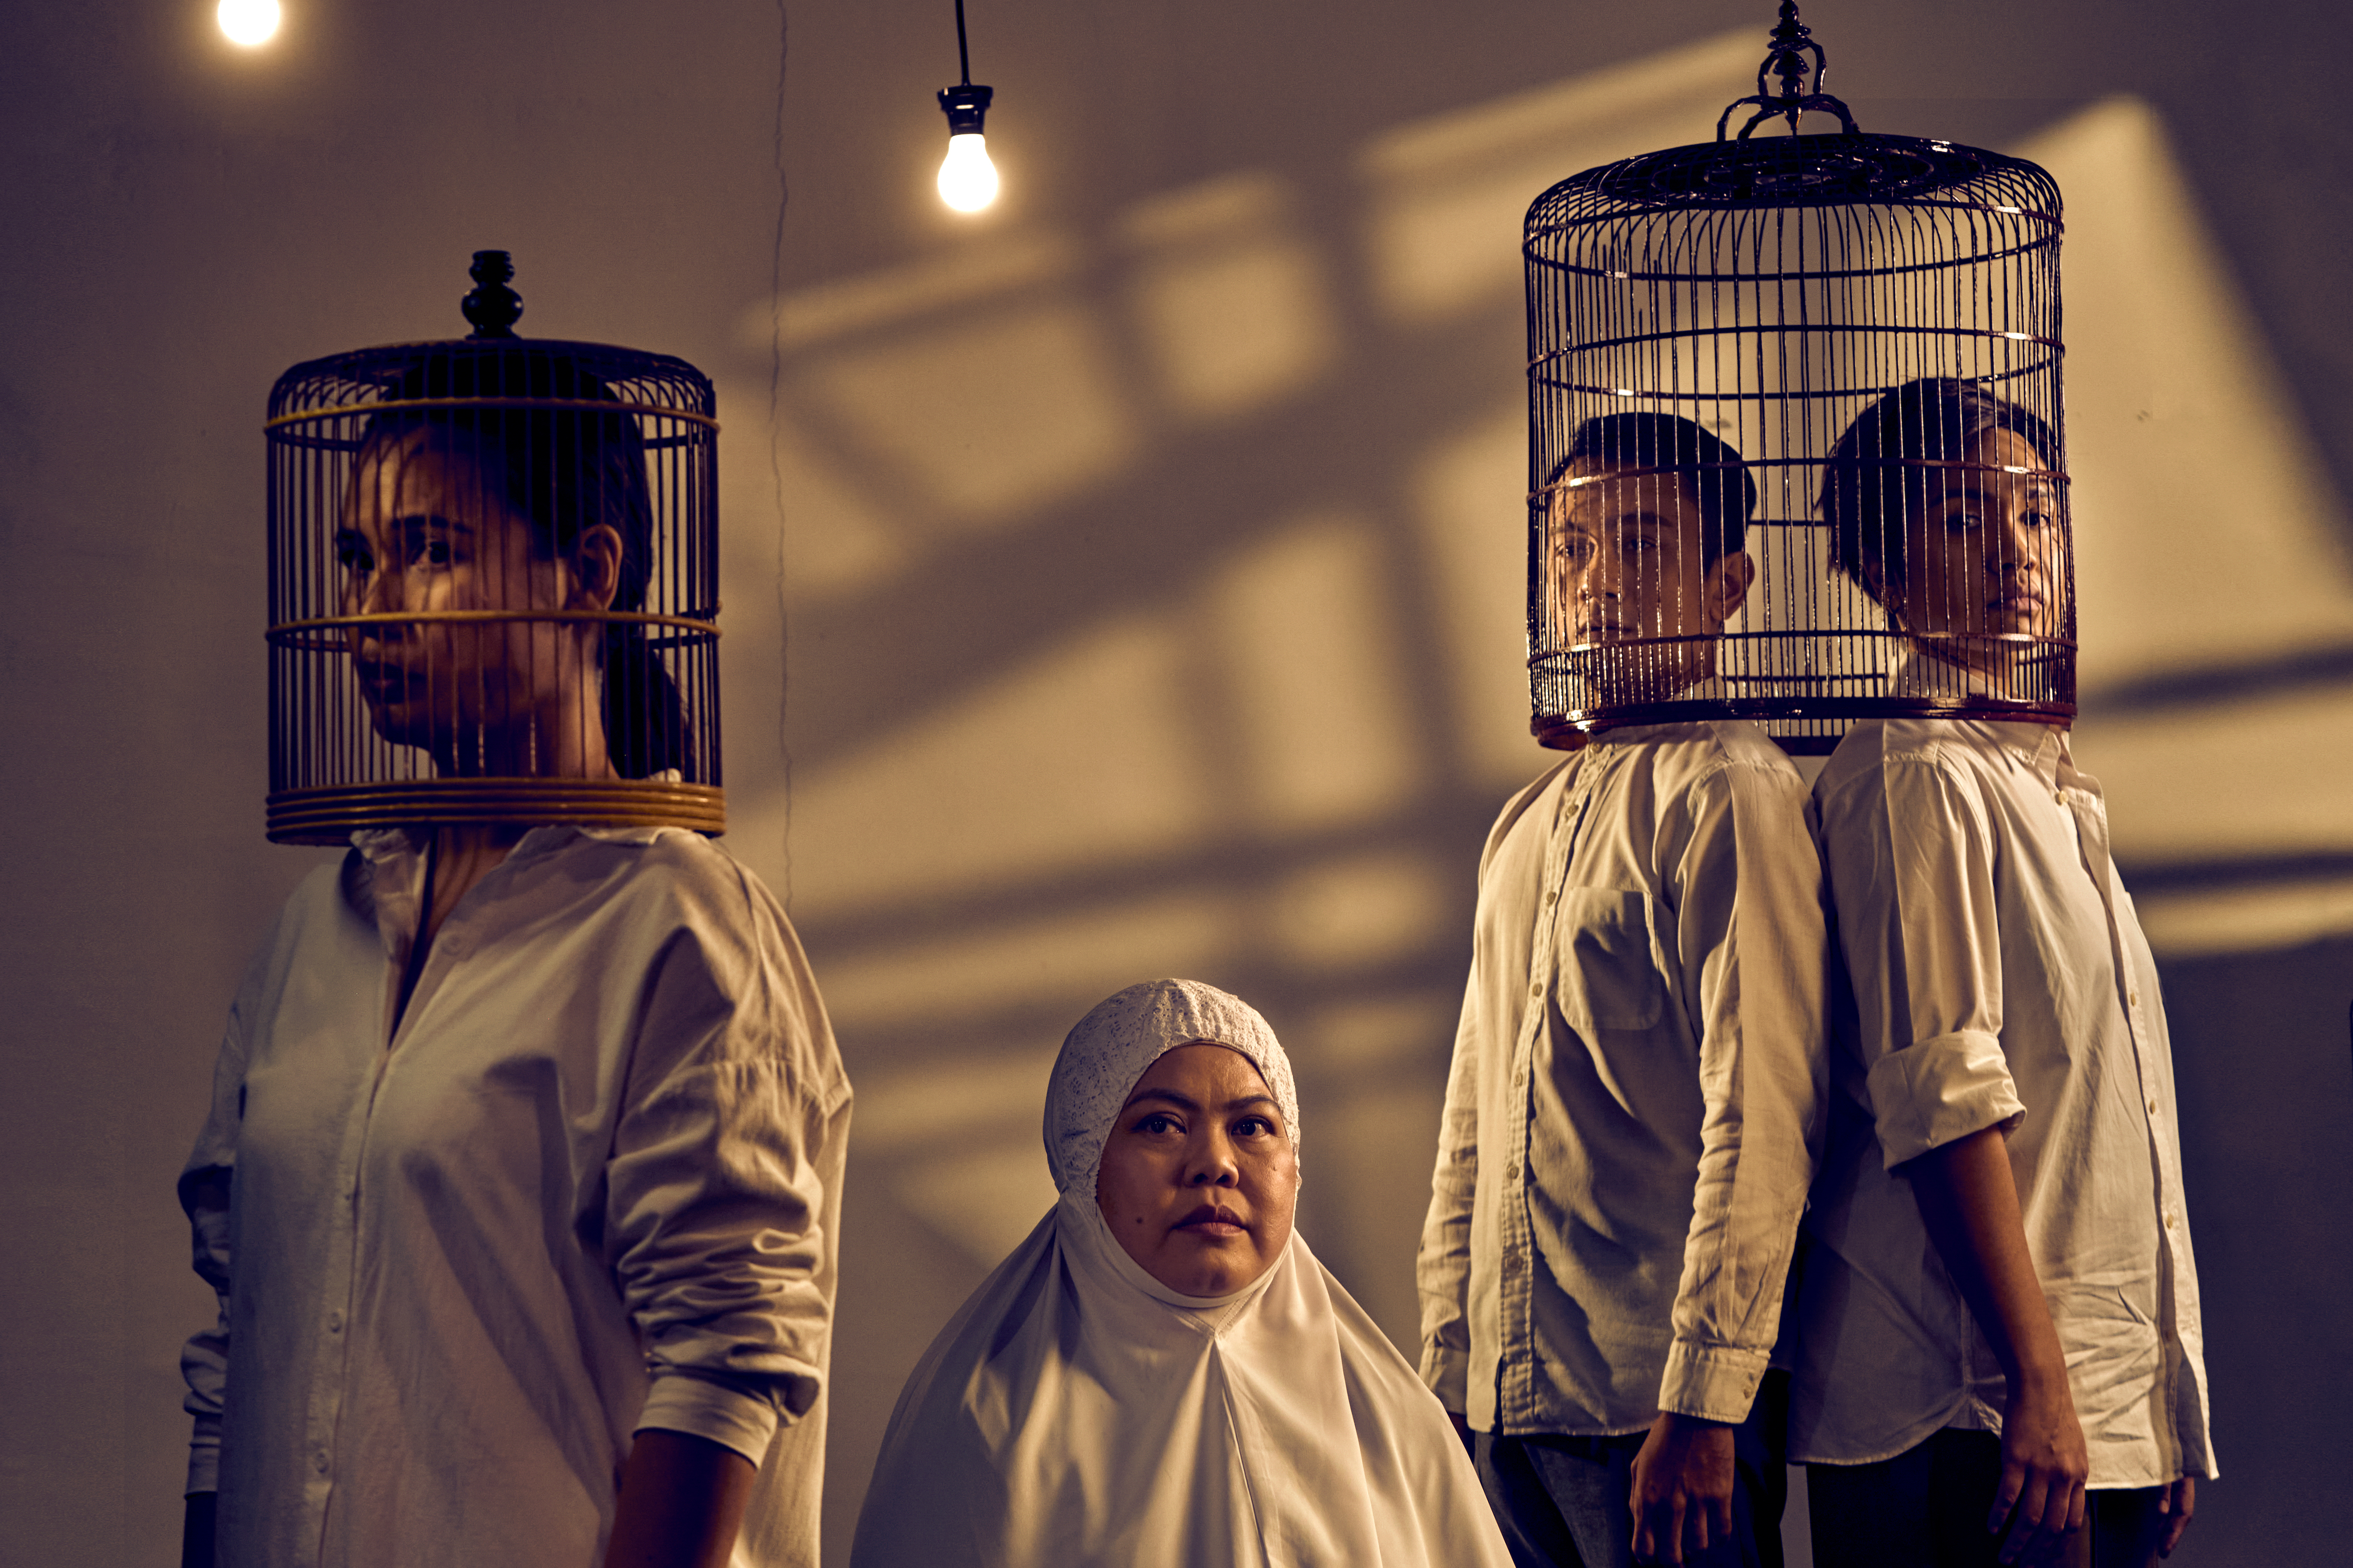 Image 1 of 5: Three persons wearing bird cages over their heads, and a lady in a Malay prayer garment